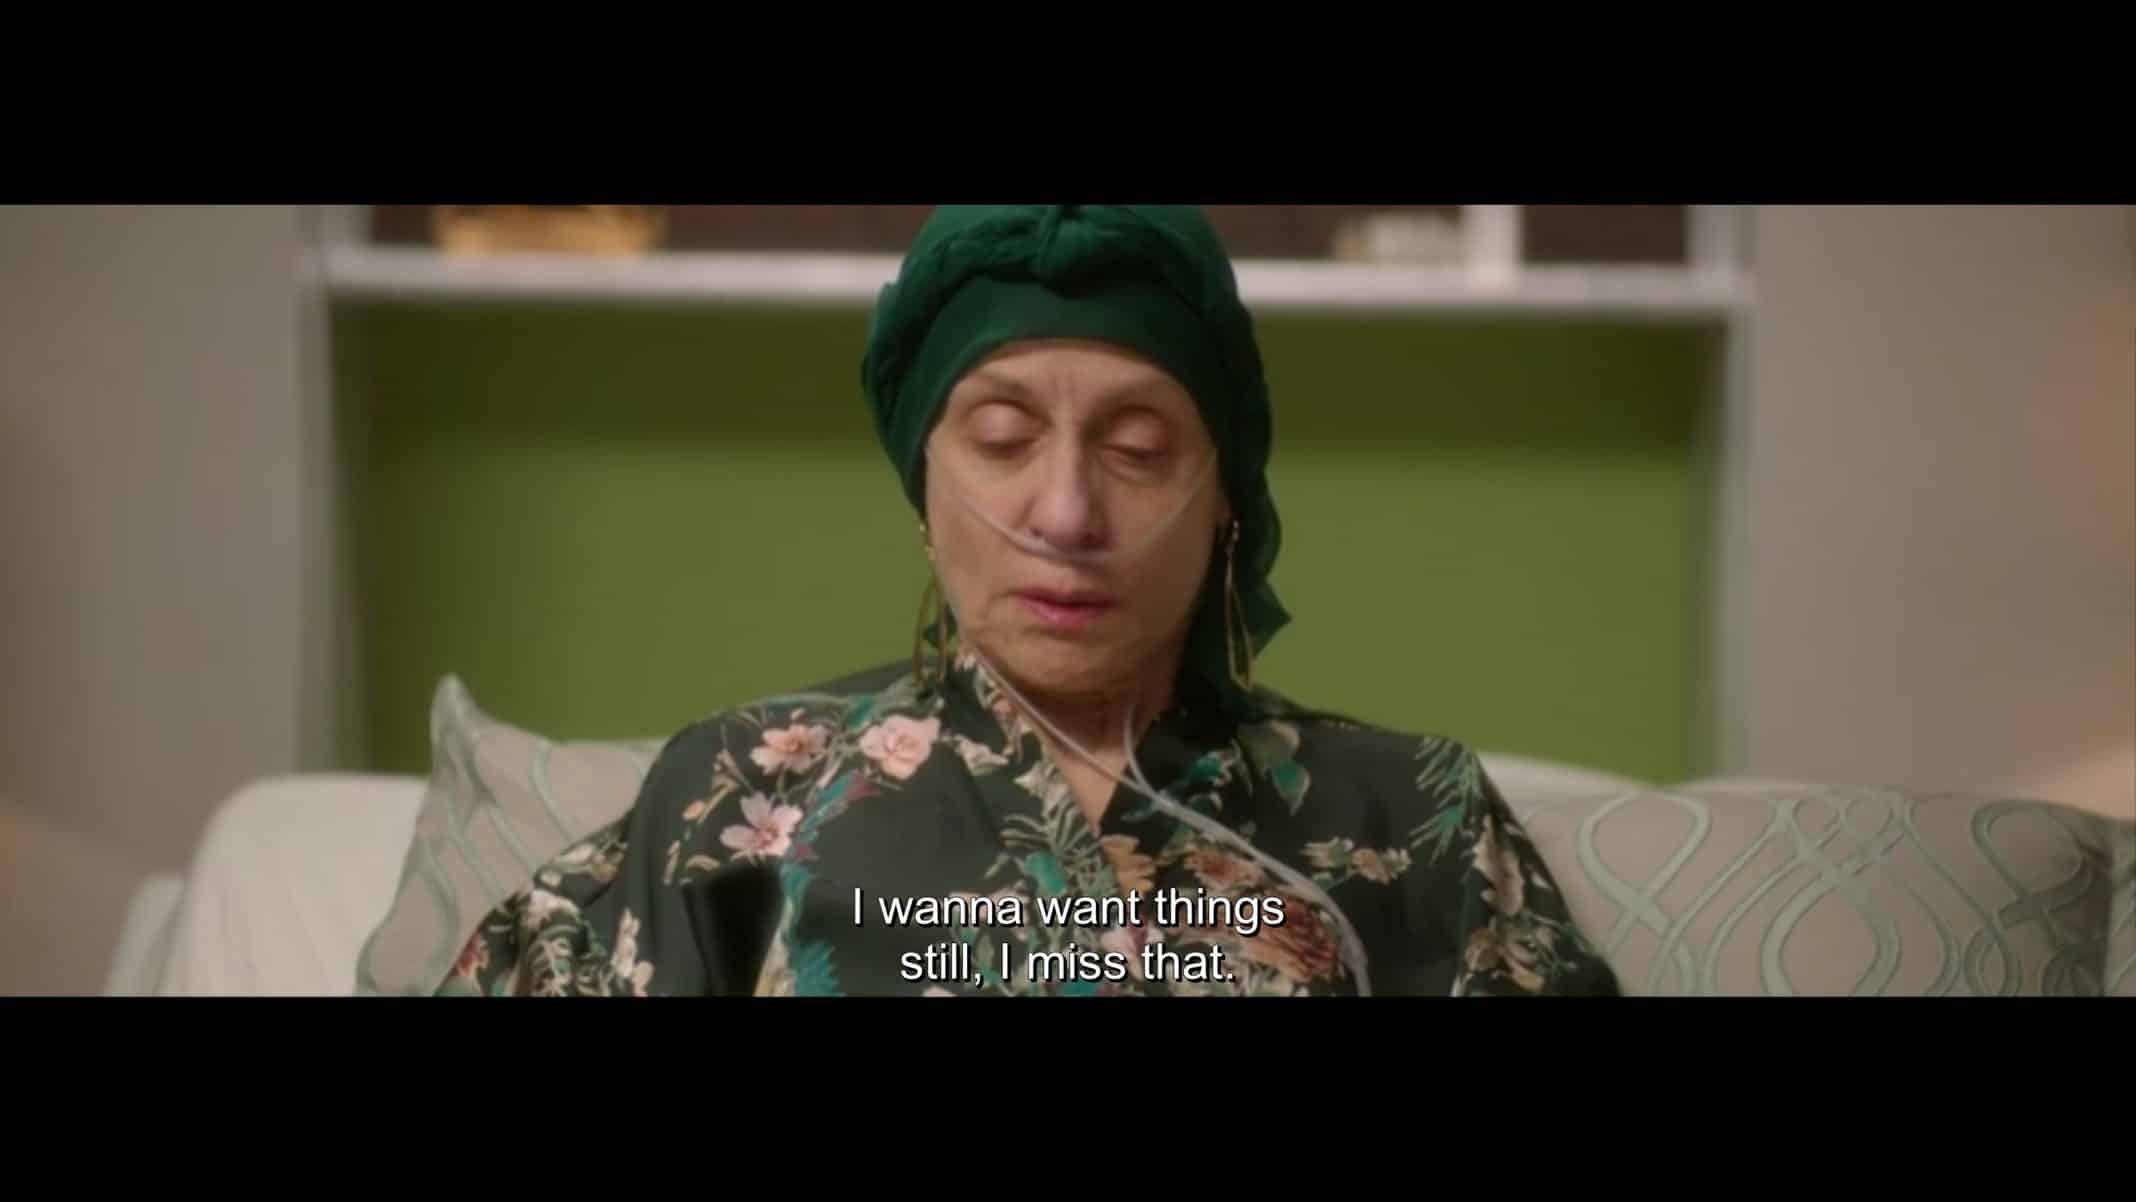 Val (Judith Light) talking about how she misses wanting things.